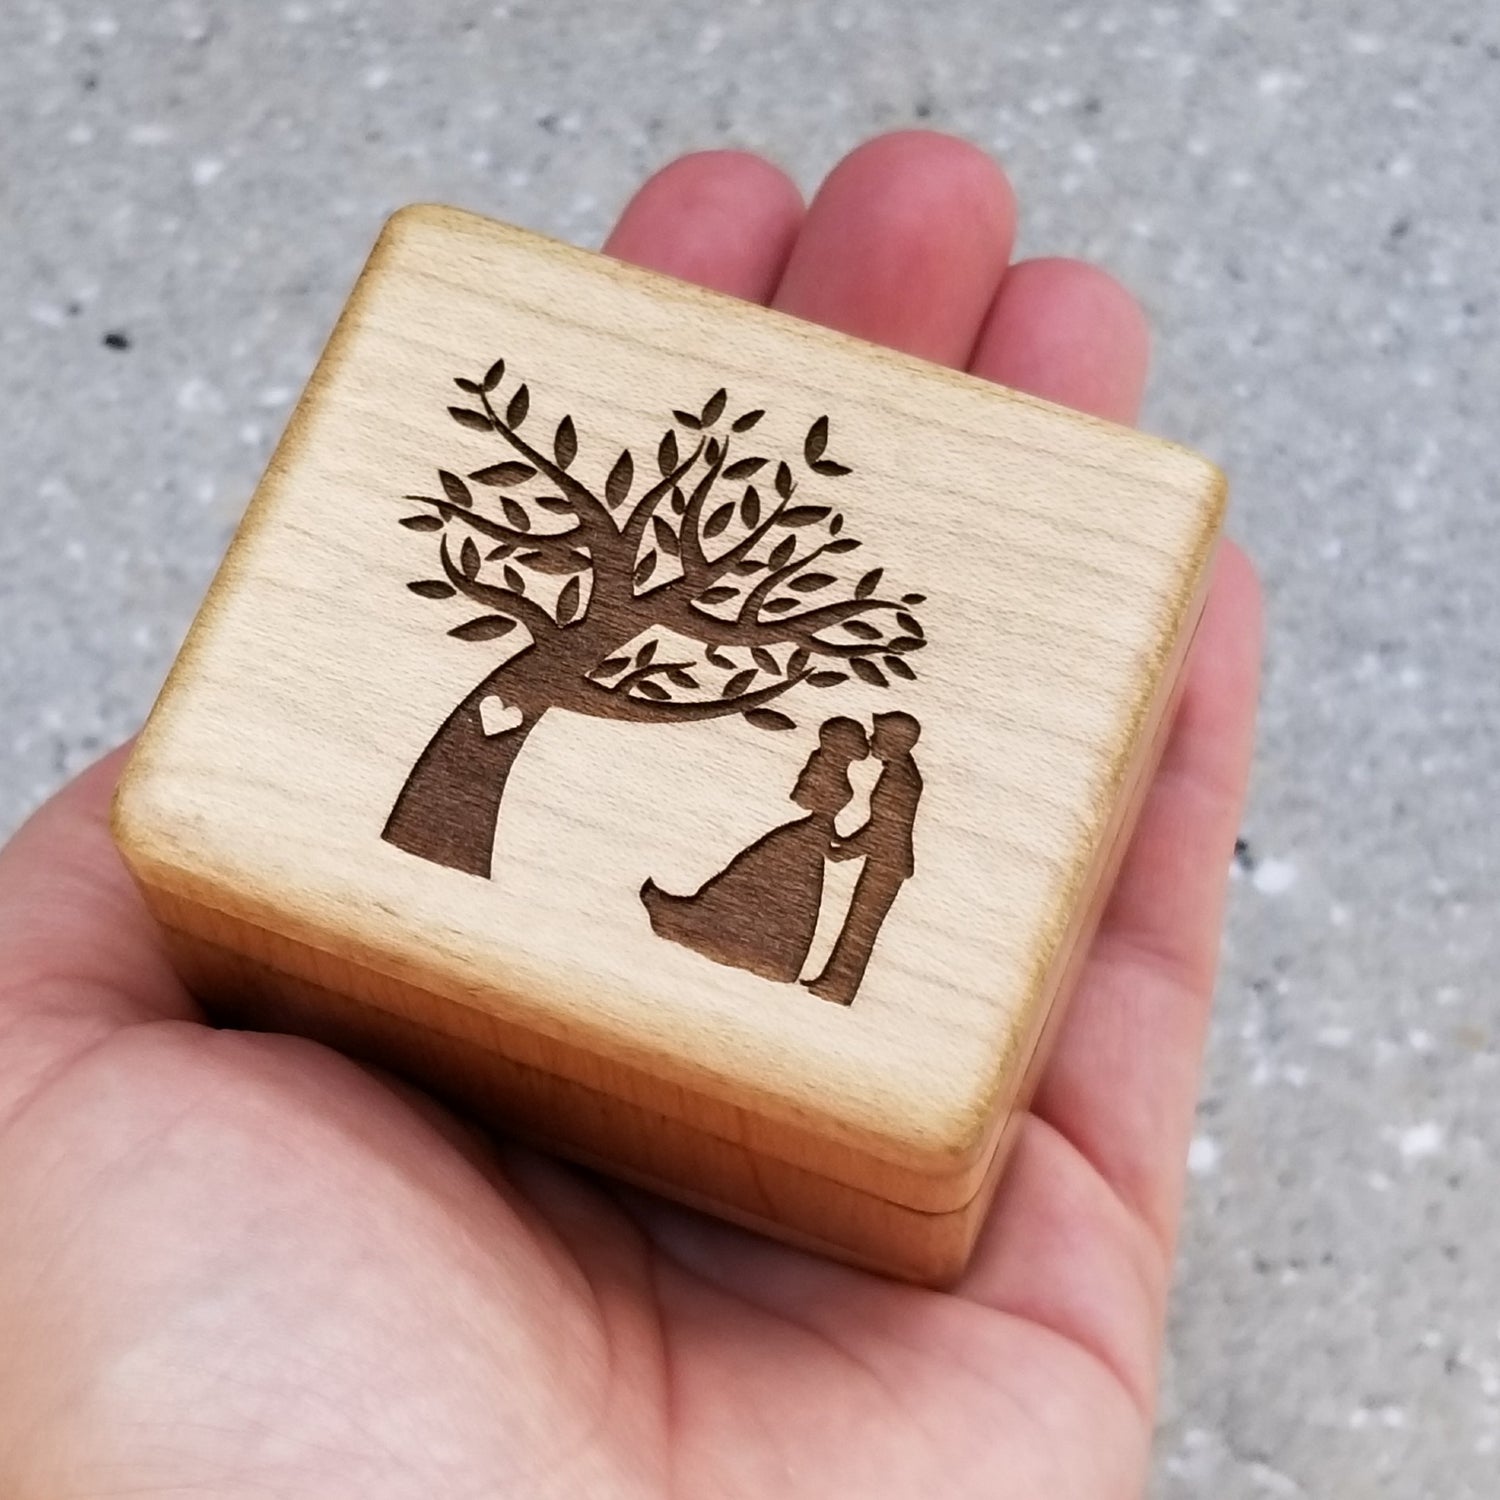 Ring box wedding couple and tree image with heart